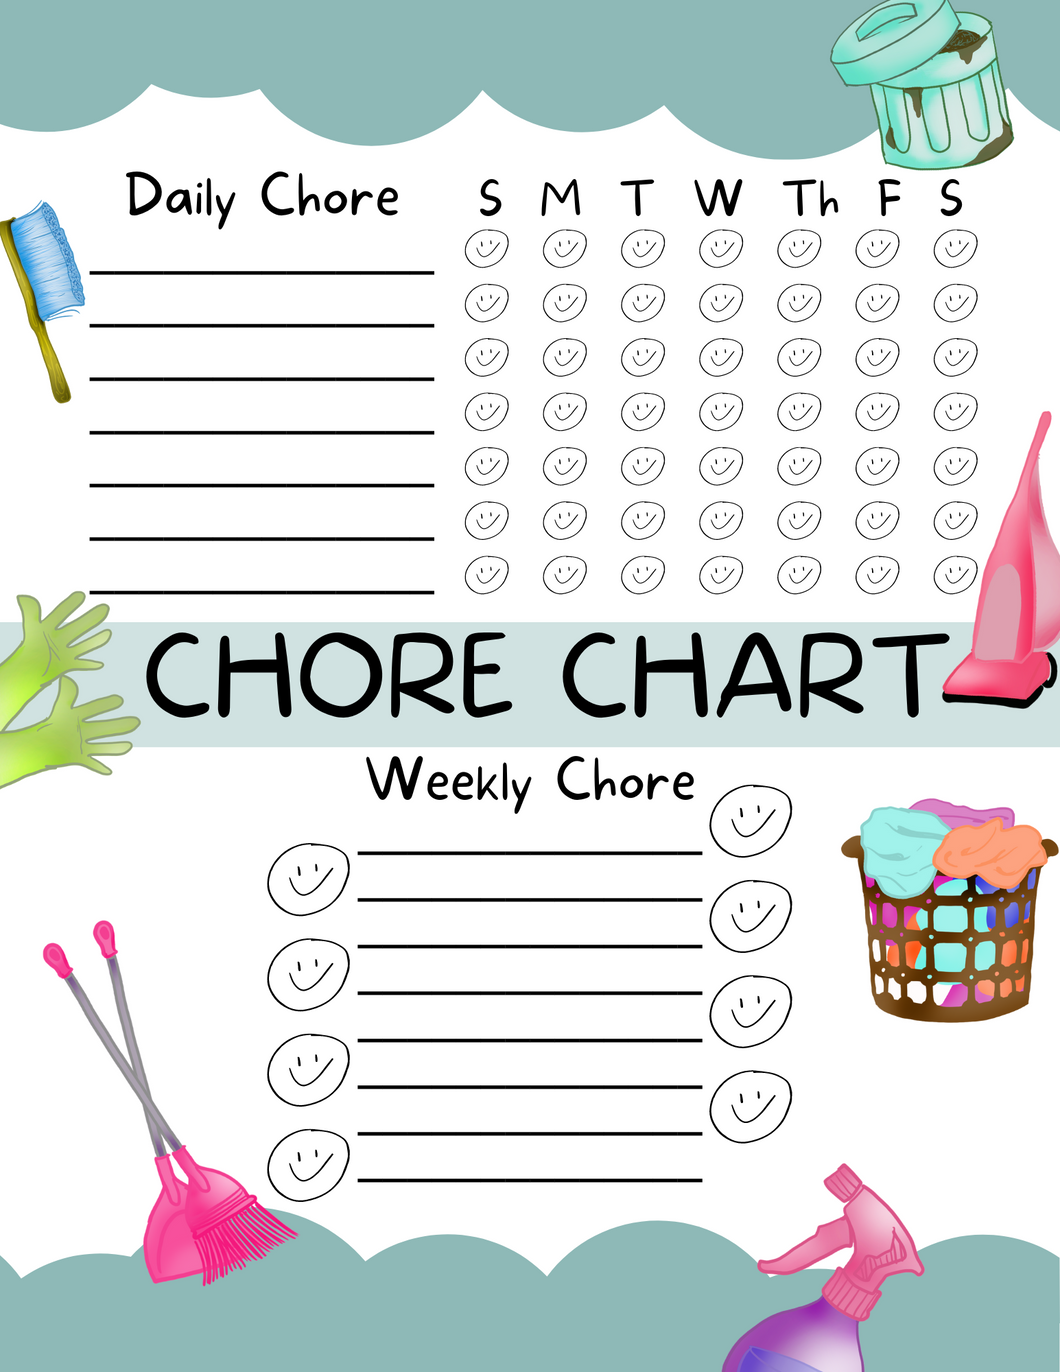 A Daily and Weekly Chore Chart with household items on it by Wondermom Printables.